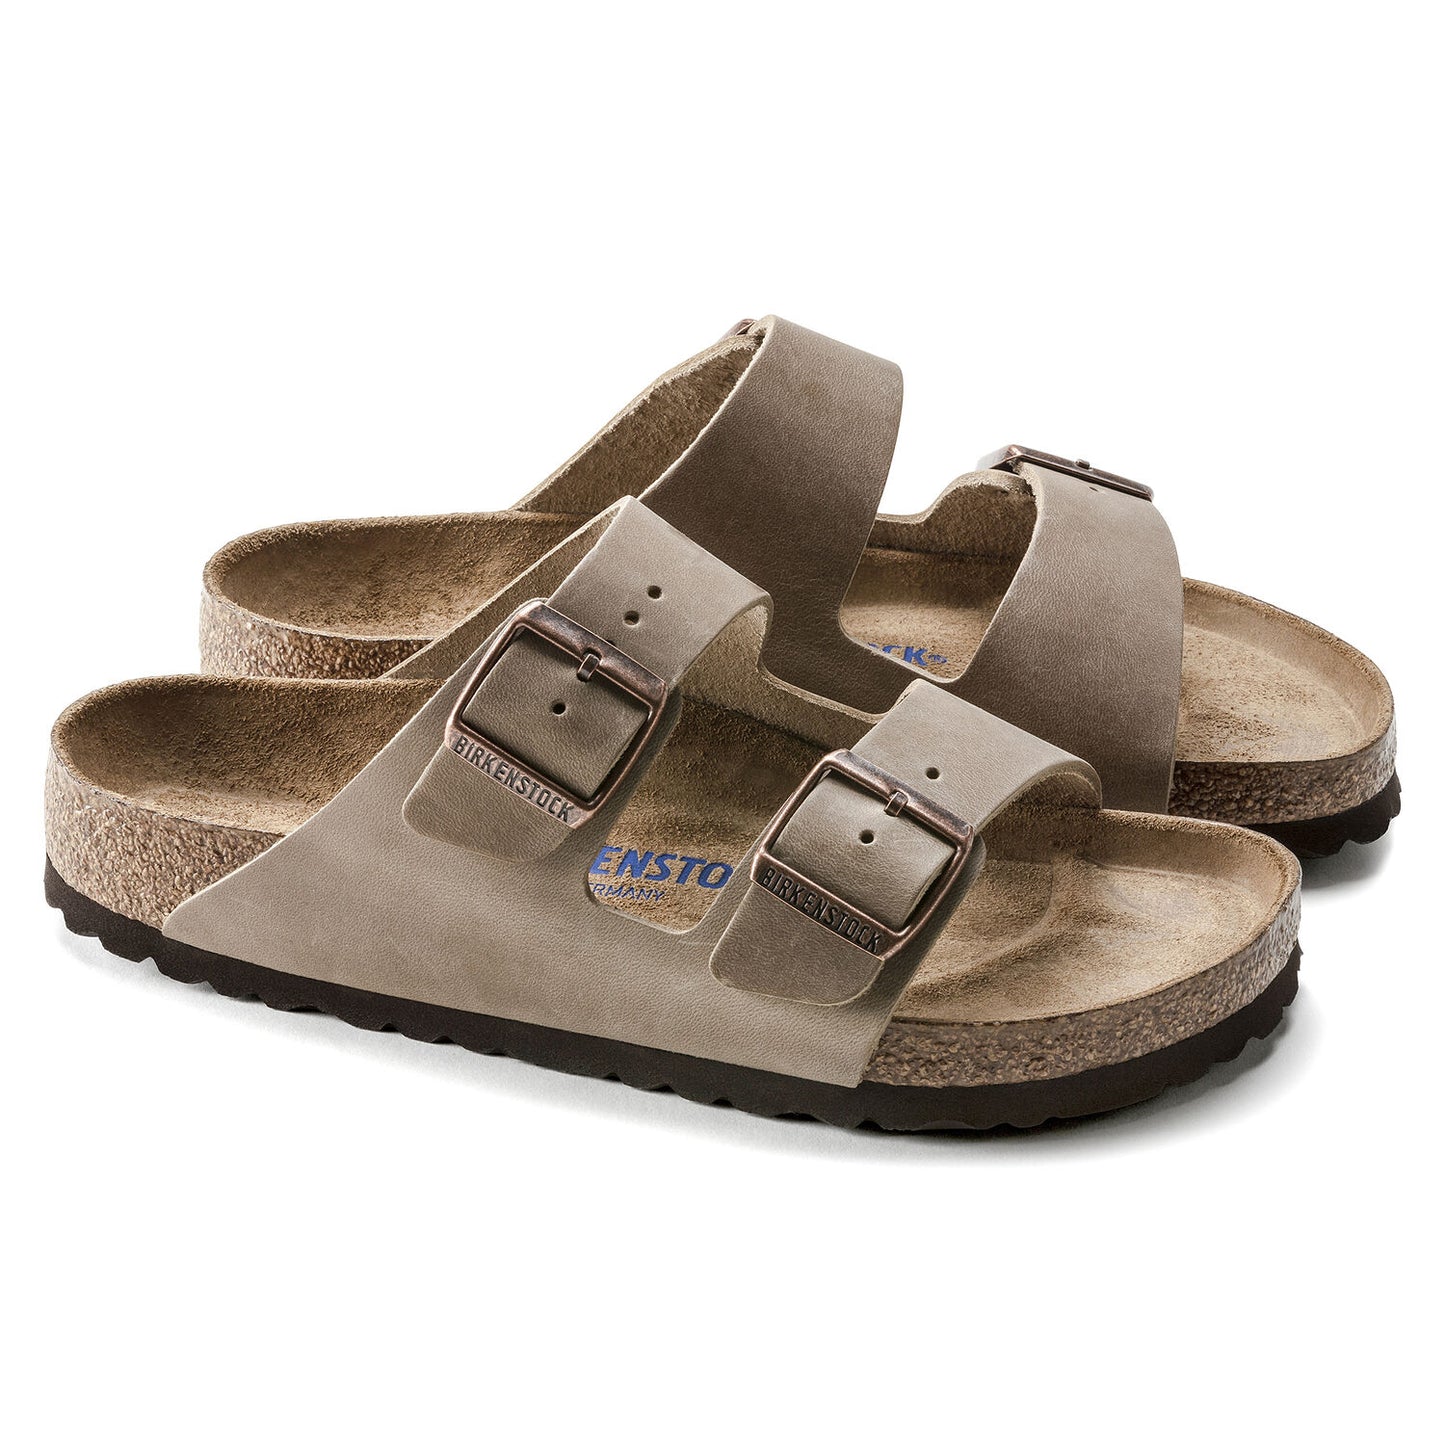 Birkenstock Arizona Soft Footbed Oiled Leather Tobacco Brown Narrow Fit 0552813